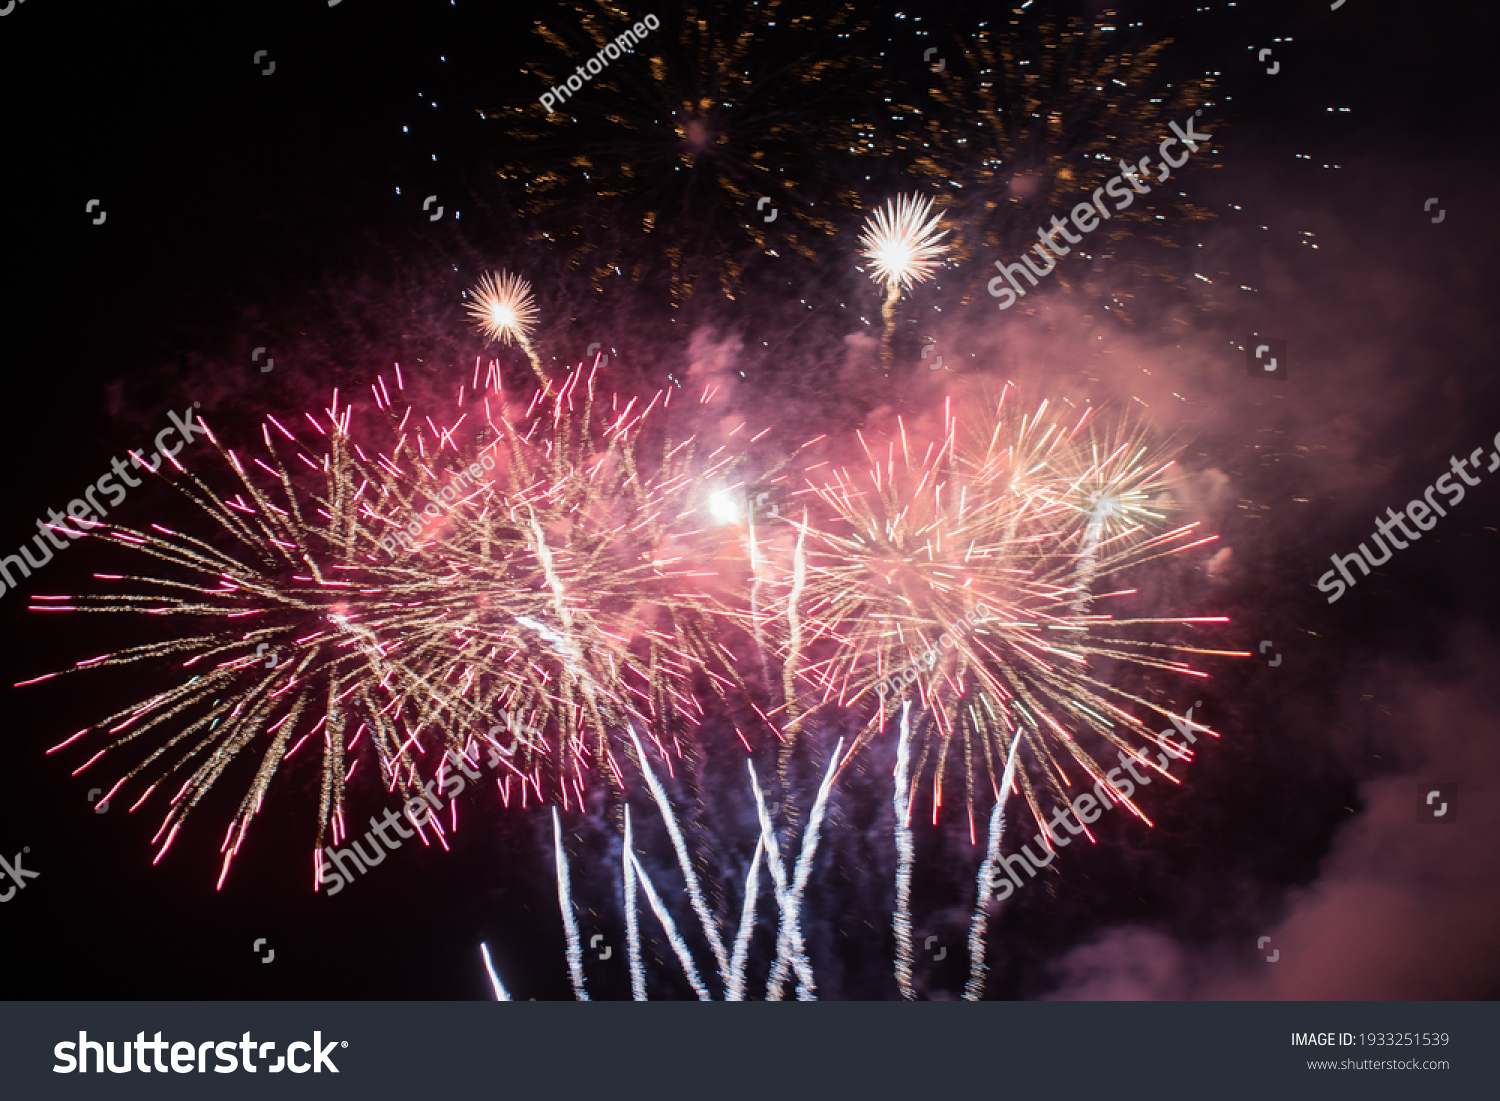 Fireworks in the new year festival #1933251539